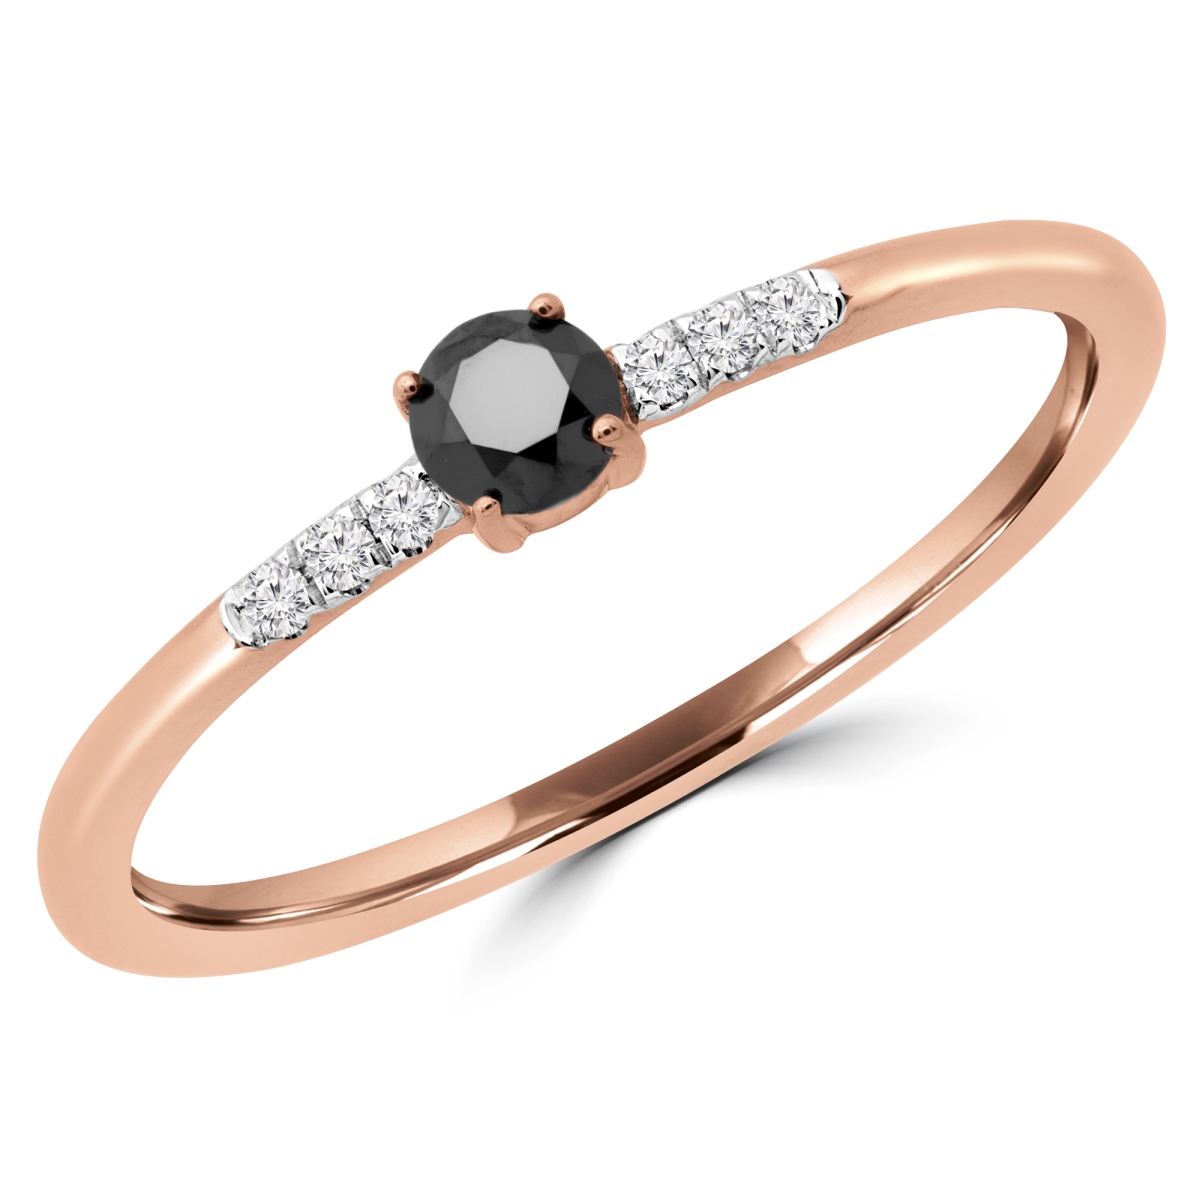 Picture of Majesty Diamonds MDR190079-4 0.16 CTW Round Black Diamond Bezel Set Cocktail Ring in 14K Rose Gold - Size 4